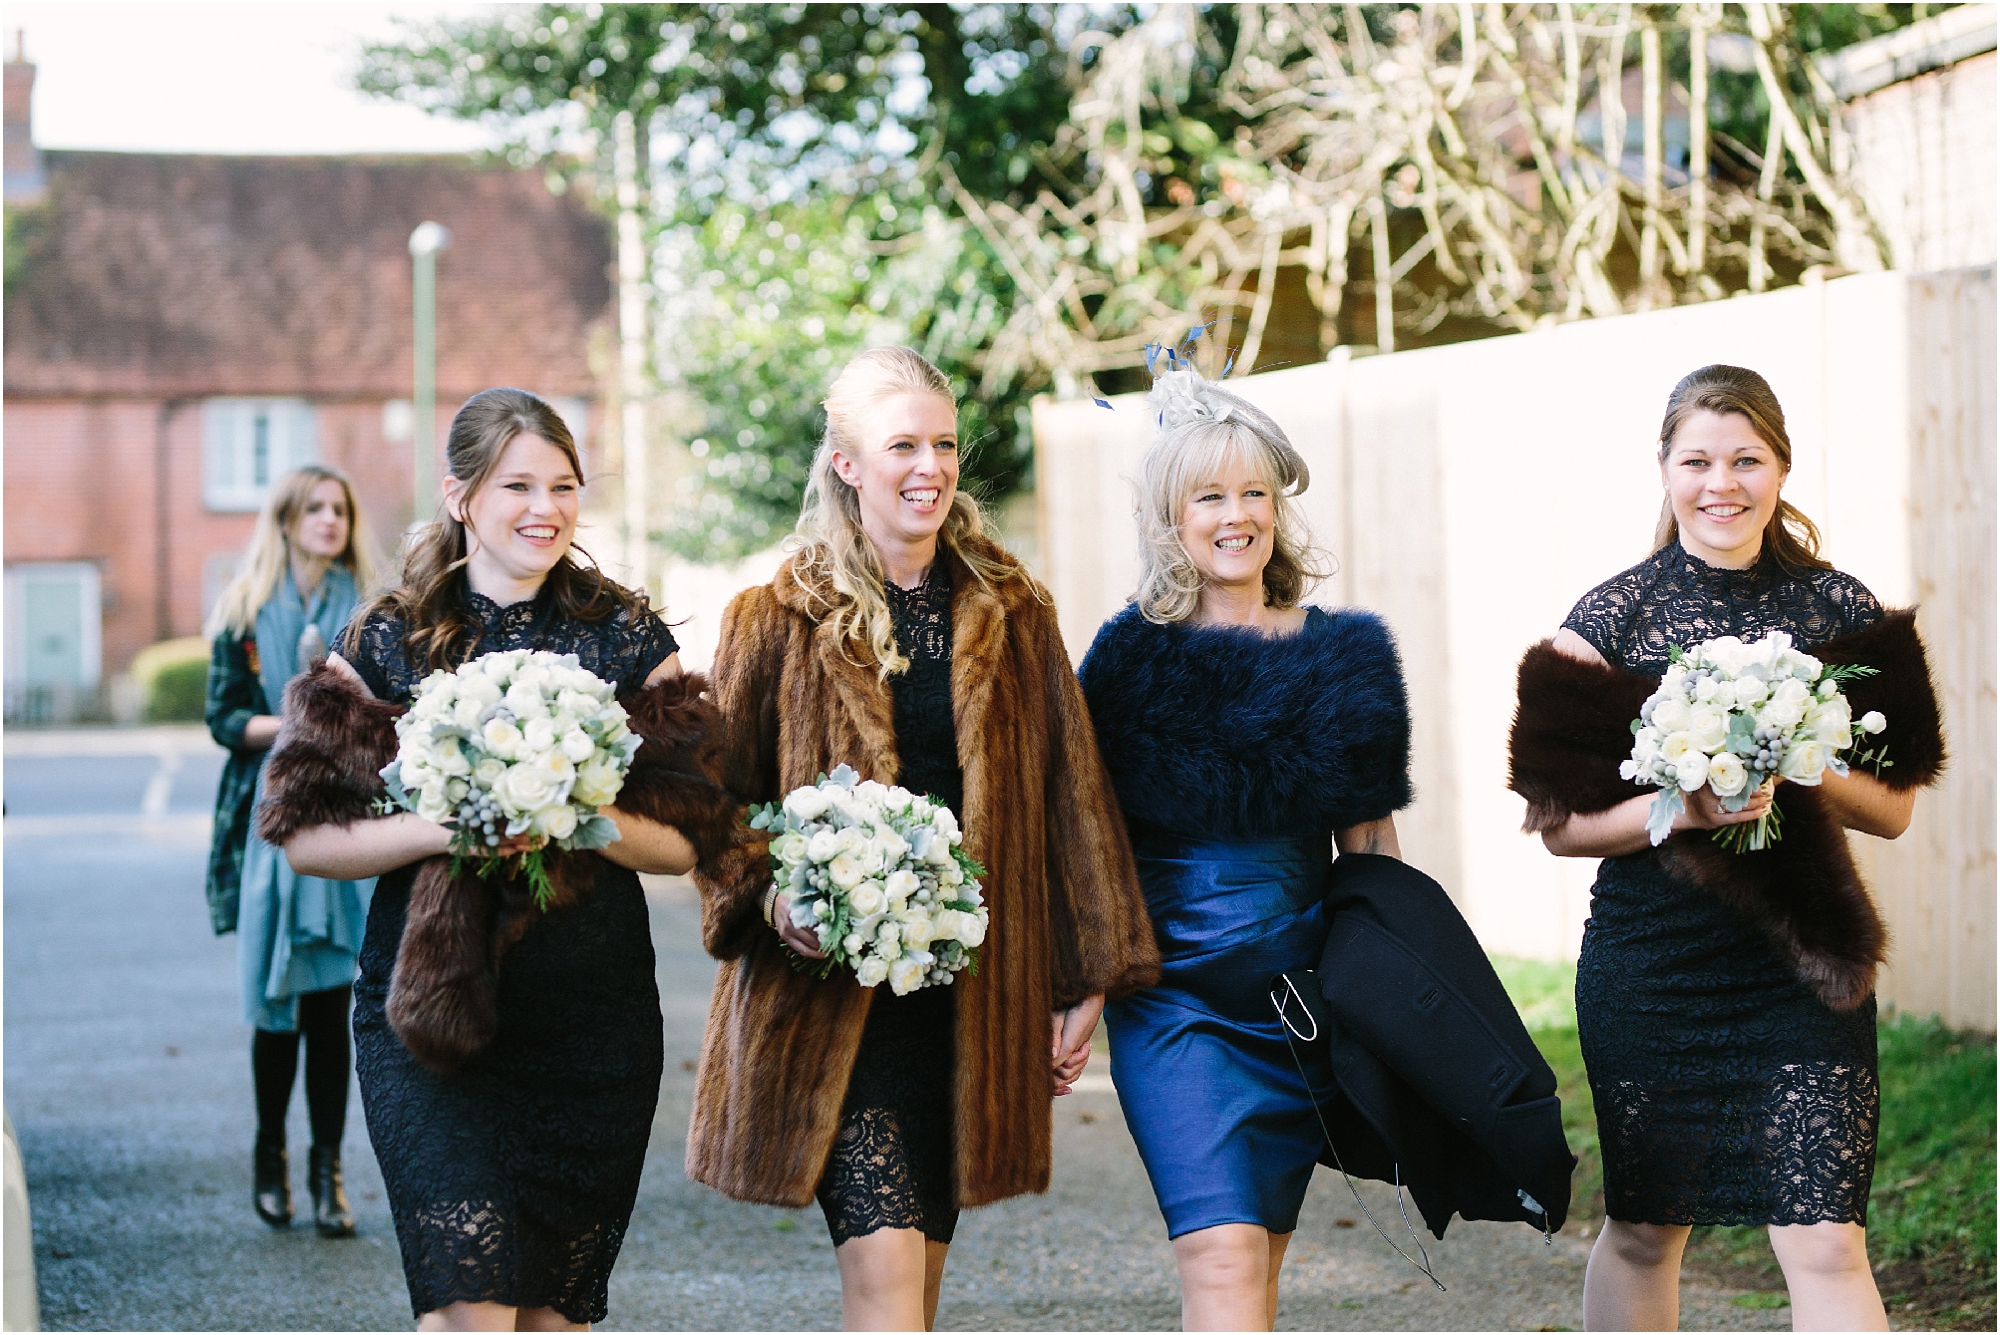 Bridesmaids in navy dresses with fur